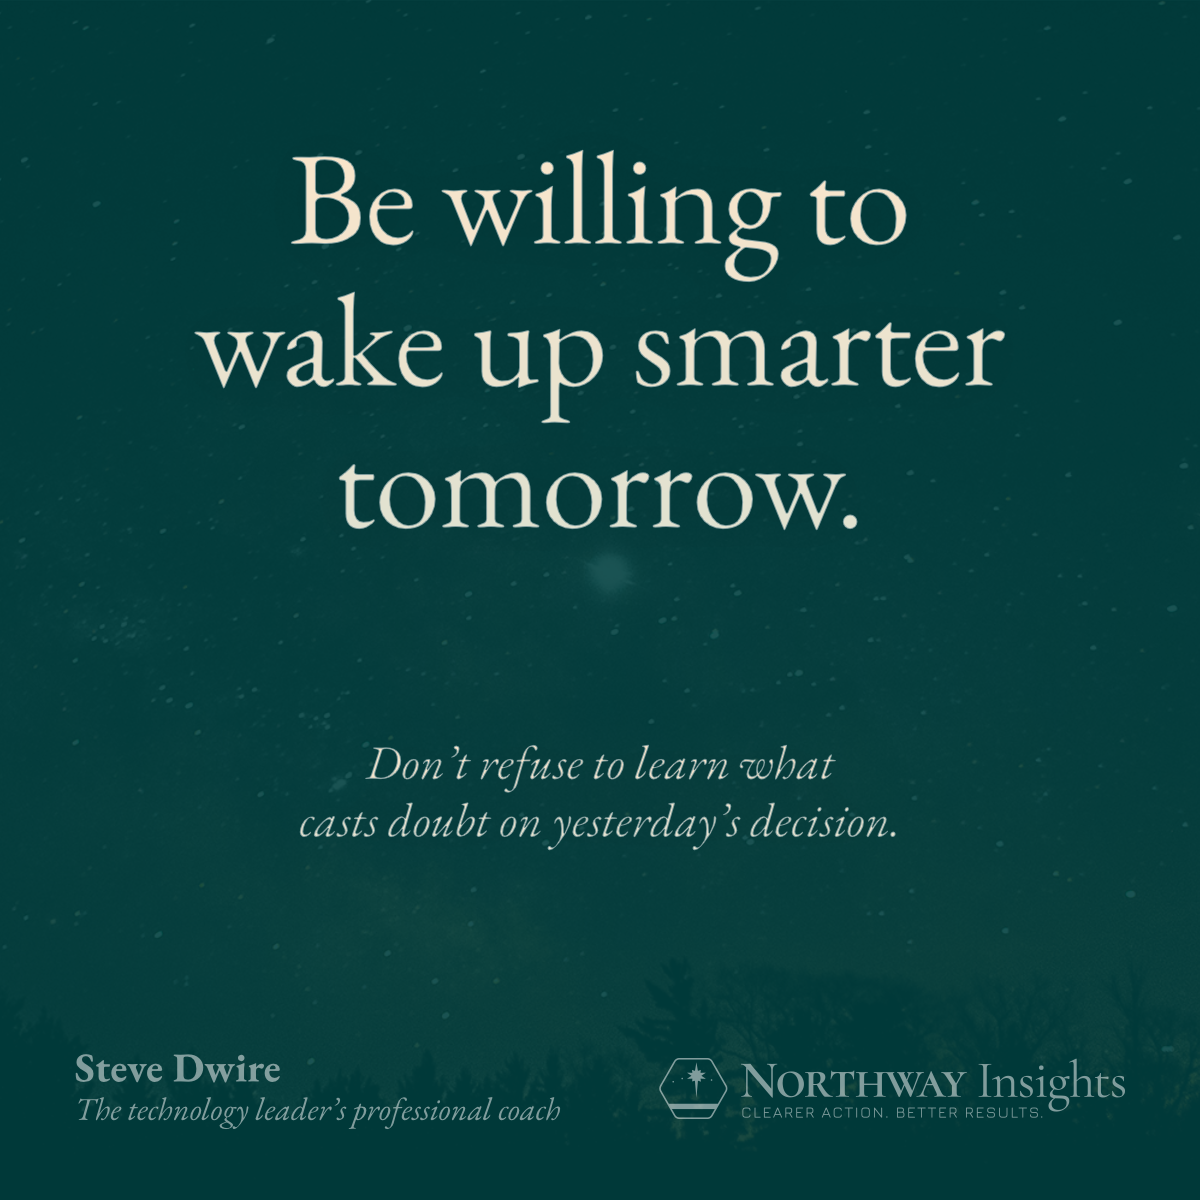 Be willing to wake up smarter tomorrow